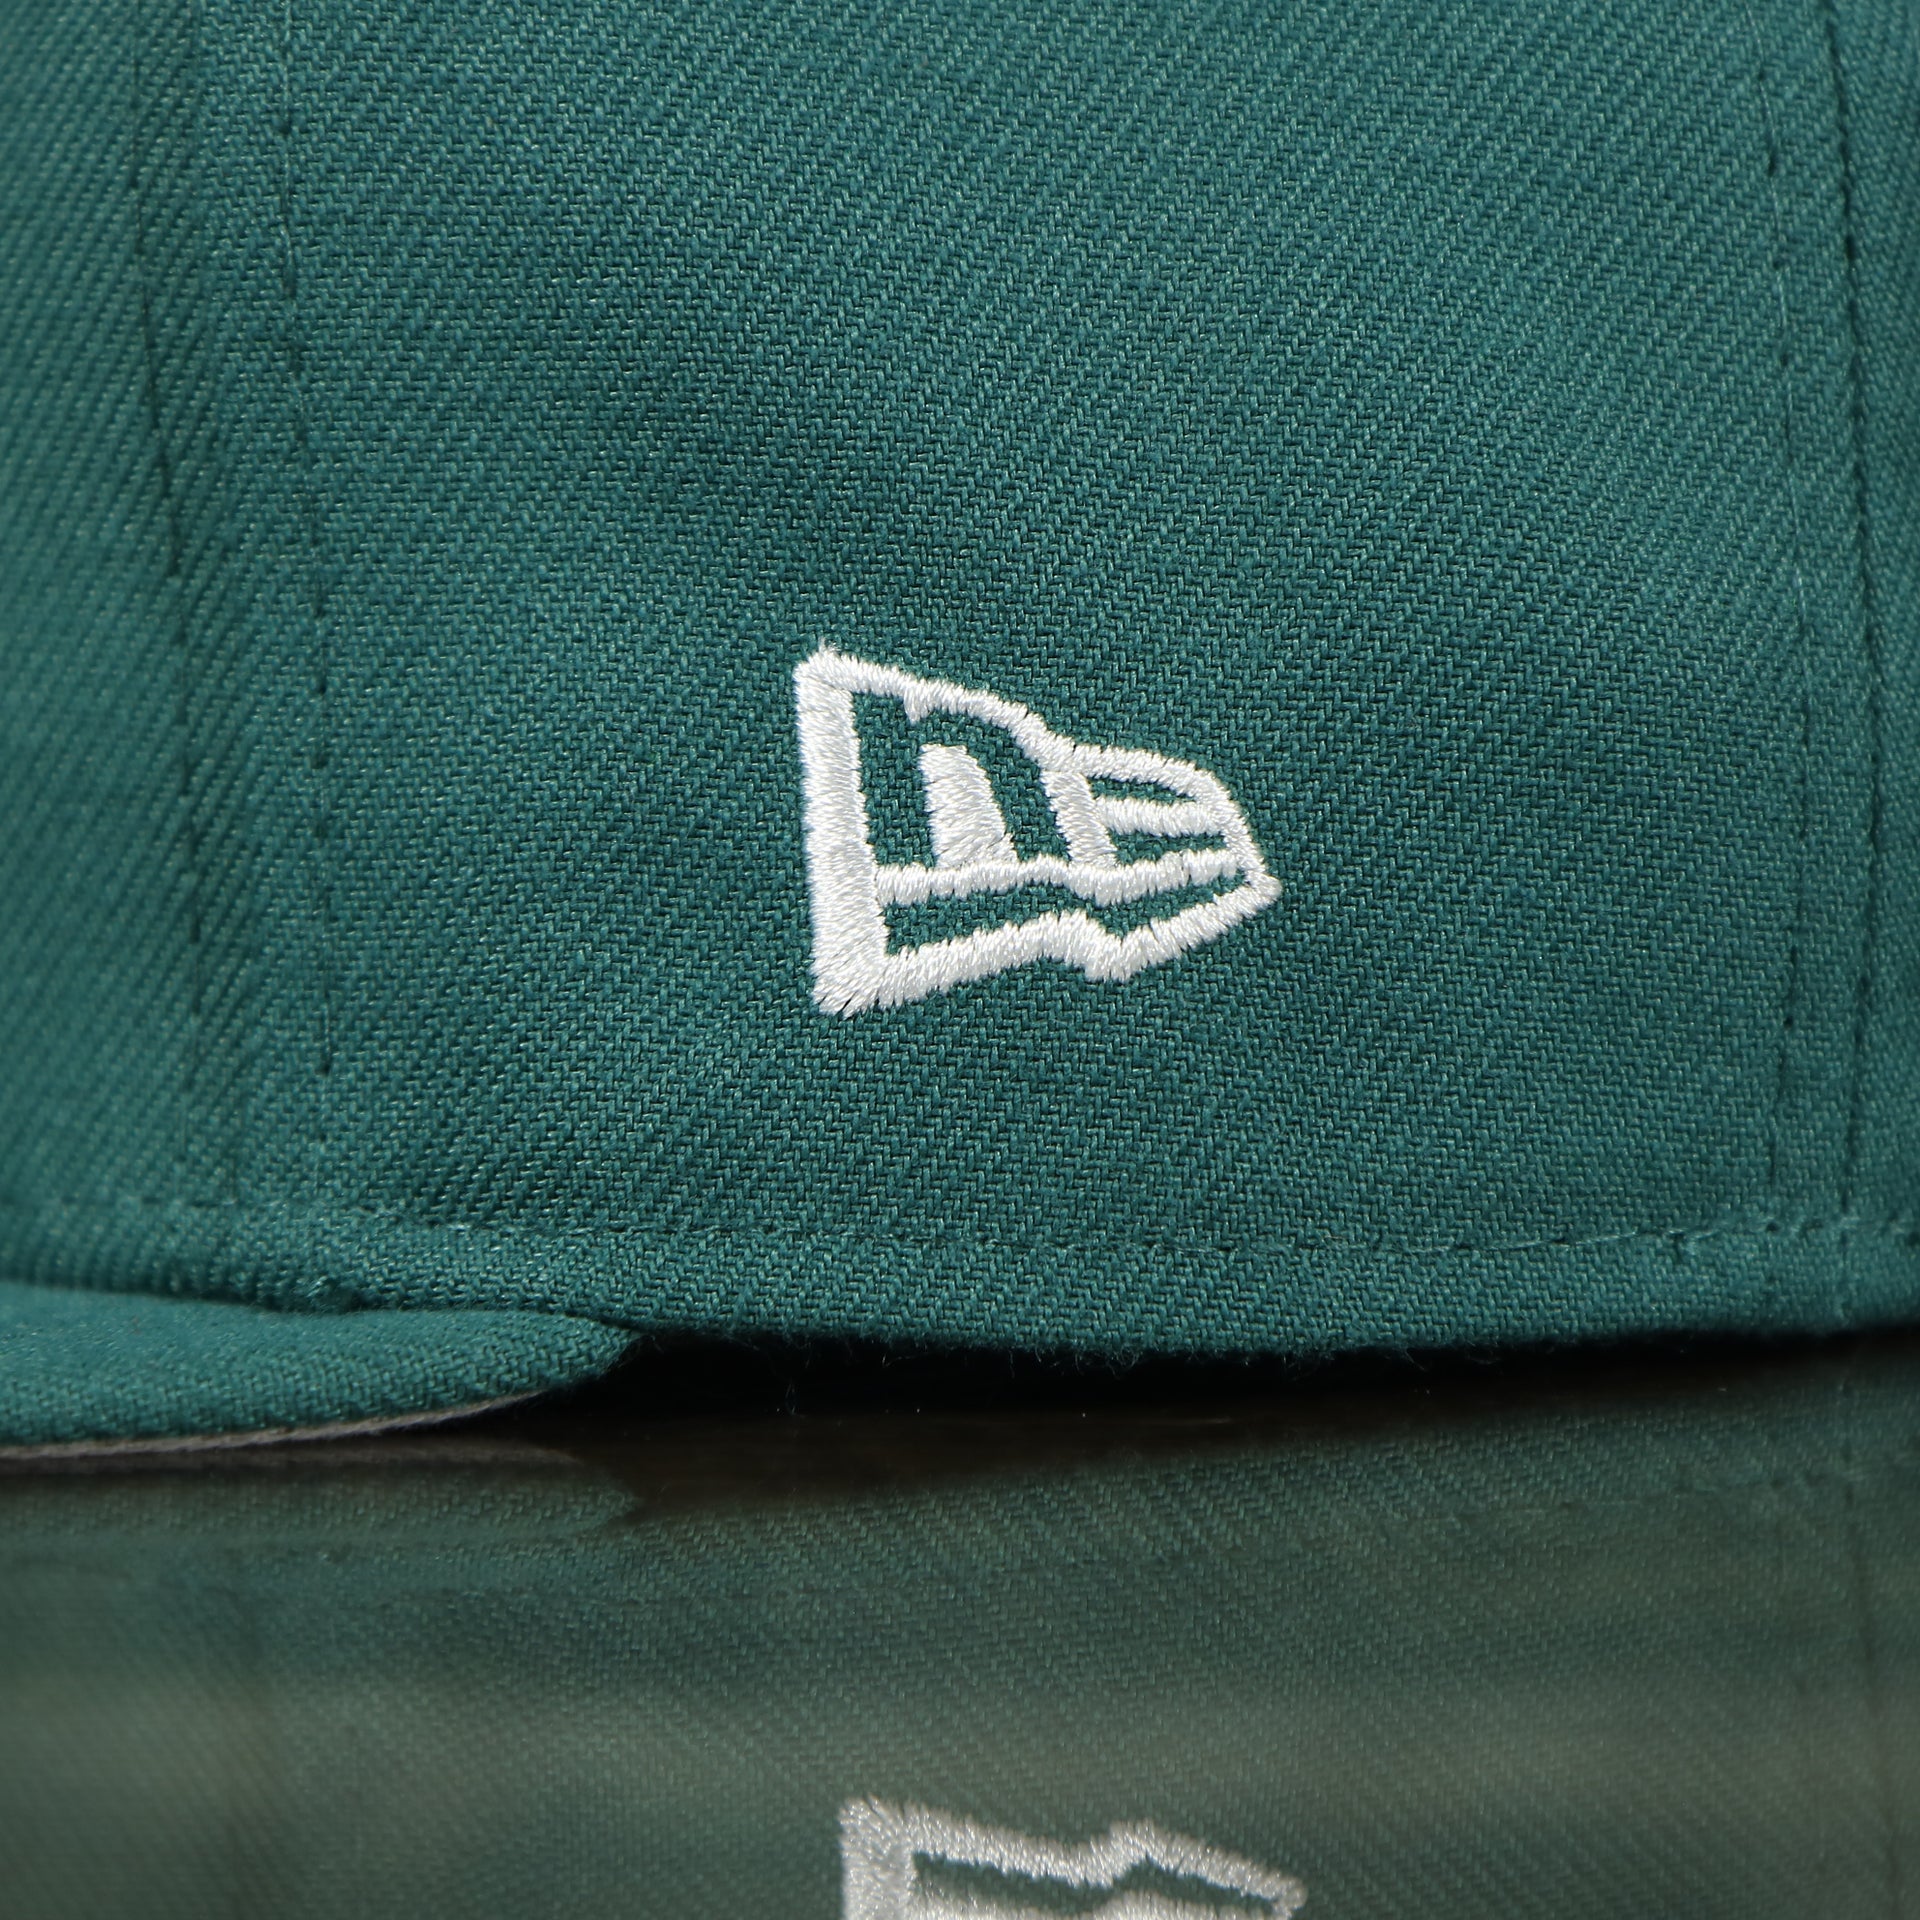 new era logo on the EAGLES Fitted hat on field current logo pine green colorway with metallic and white logo | 59FIFTY (5950) FITTED CAP | PINE NEEDLE GREEN